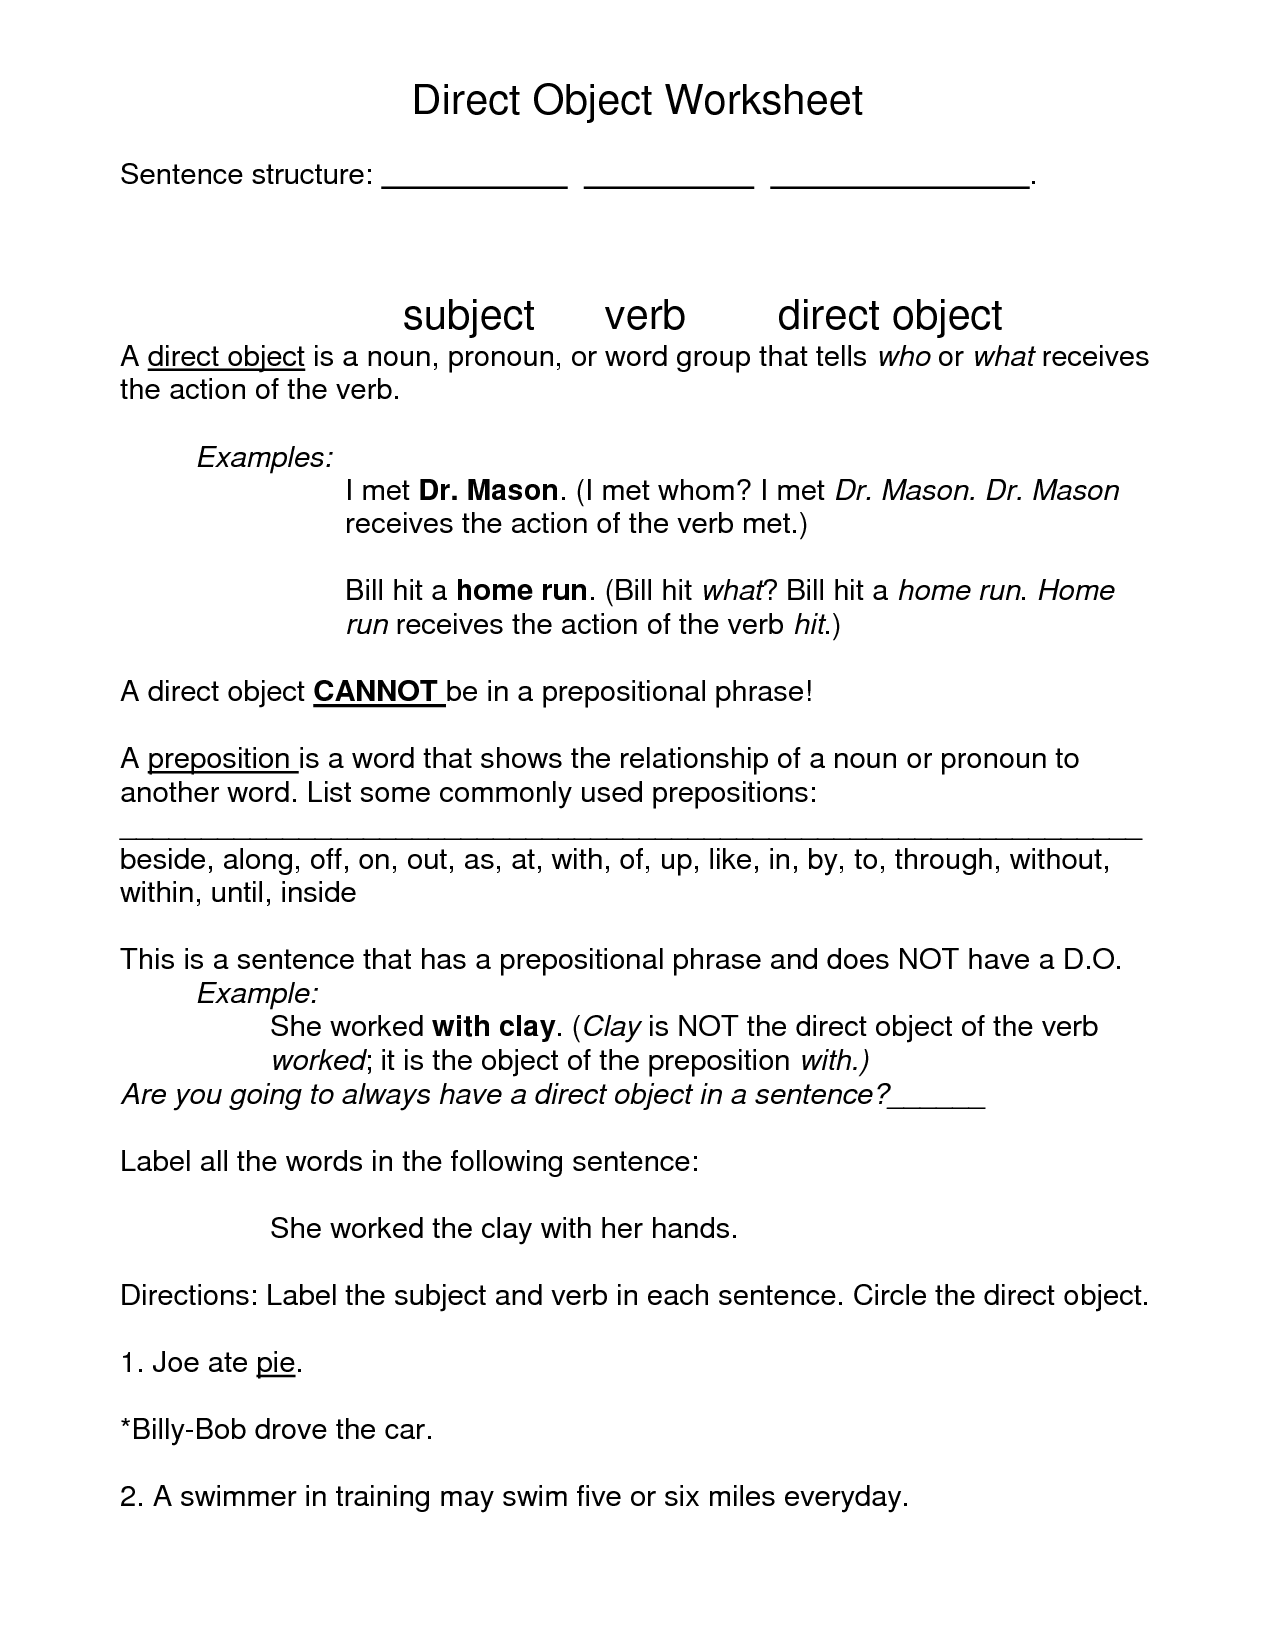 direct-object-pronouns-in-spanish-worksheet-nidecmege